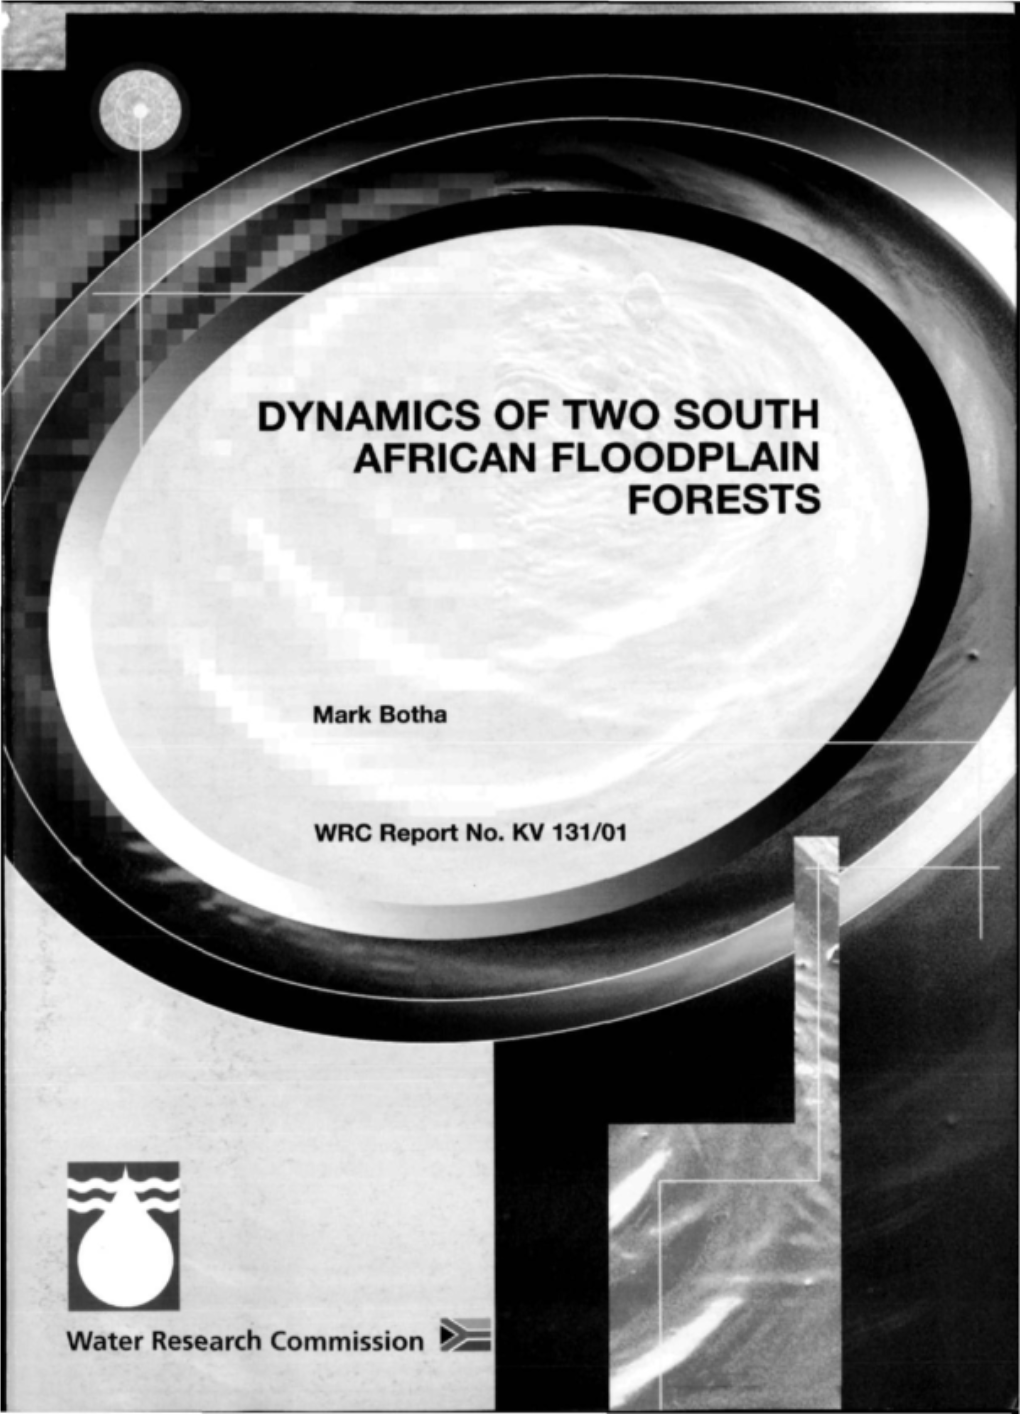 Dynamics of Two South African Floodplain Forests